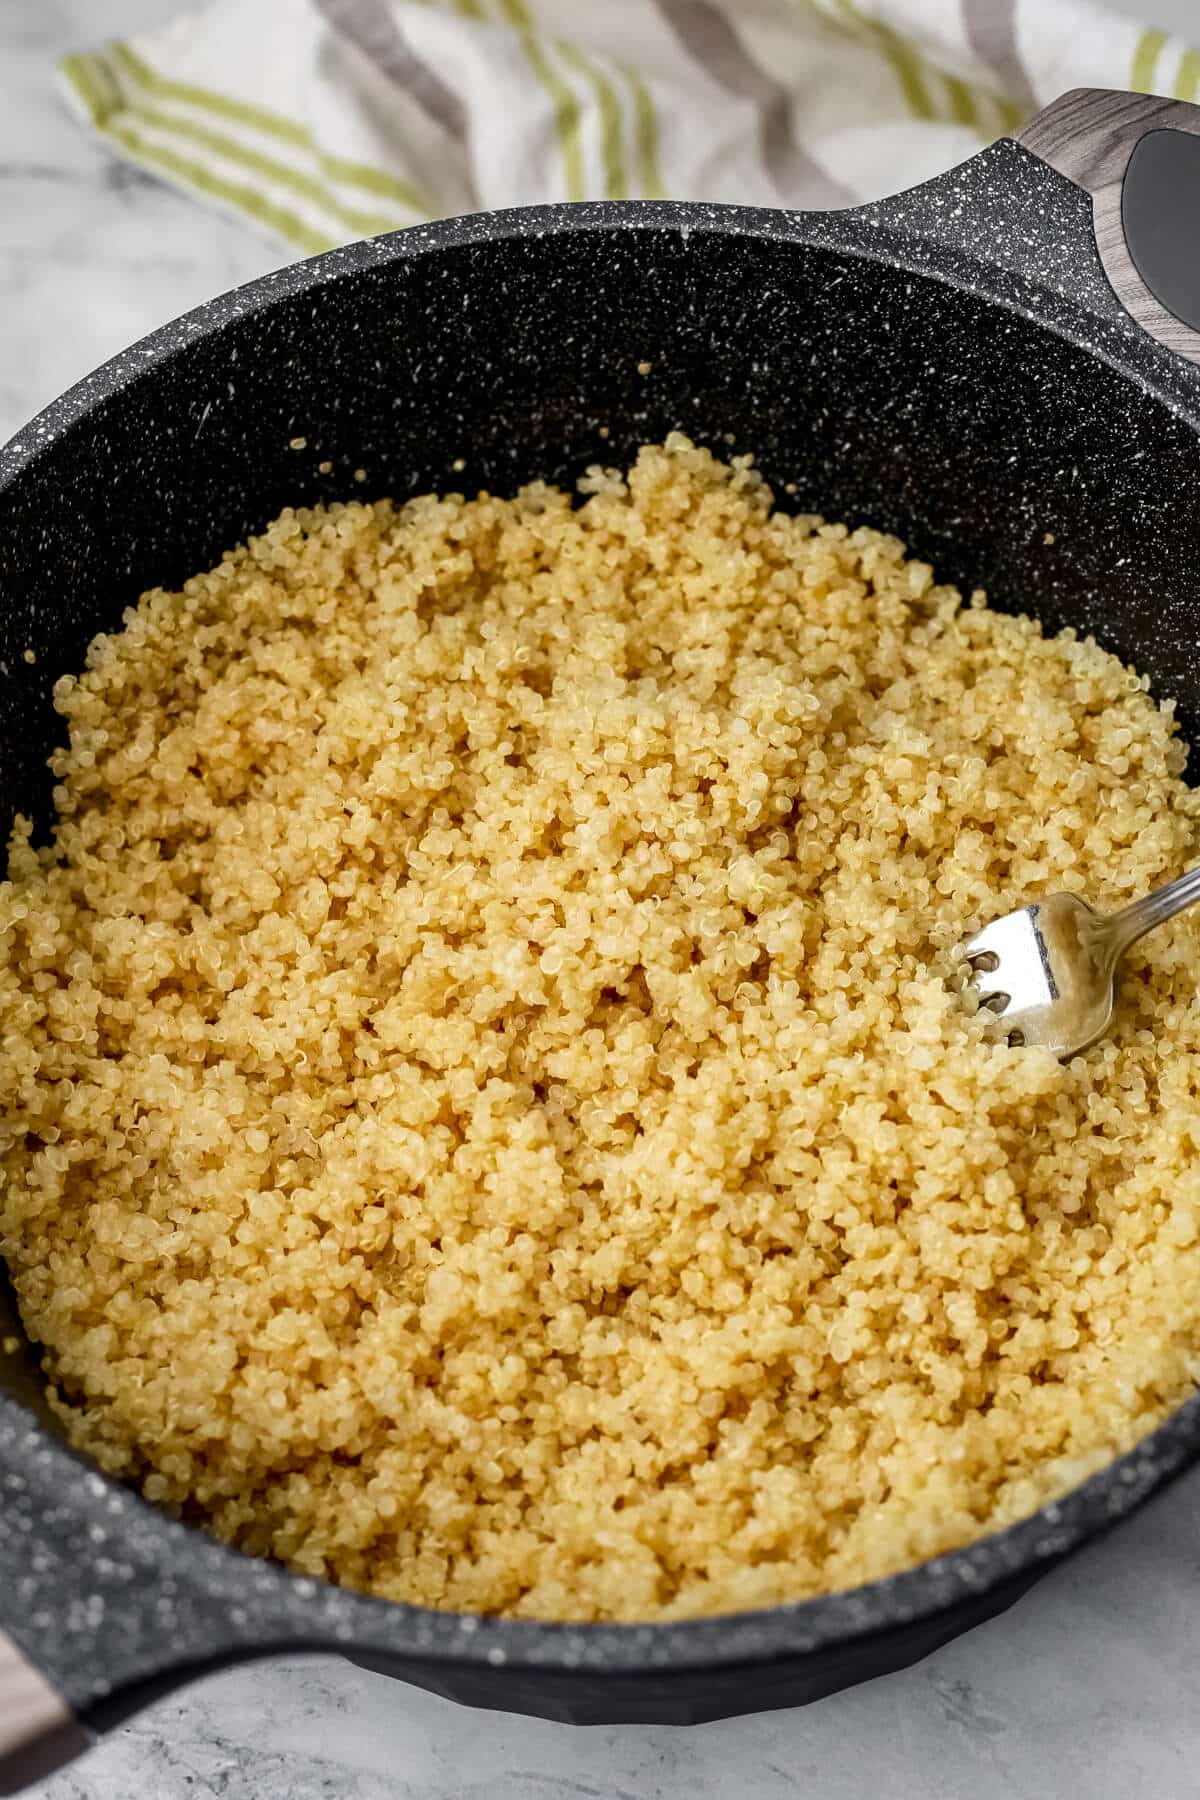 A pot of quinoa being fluffed with a fork.